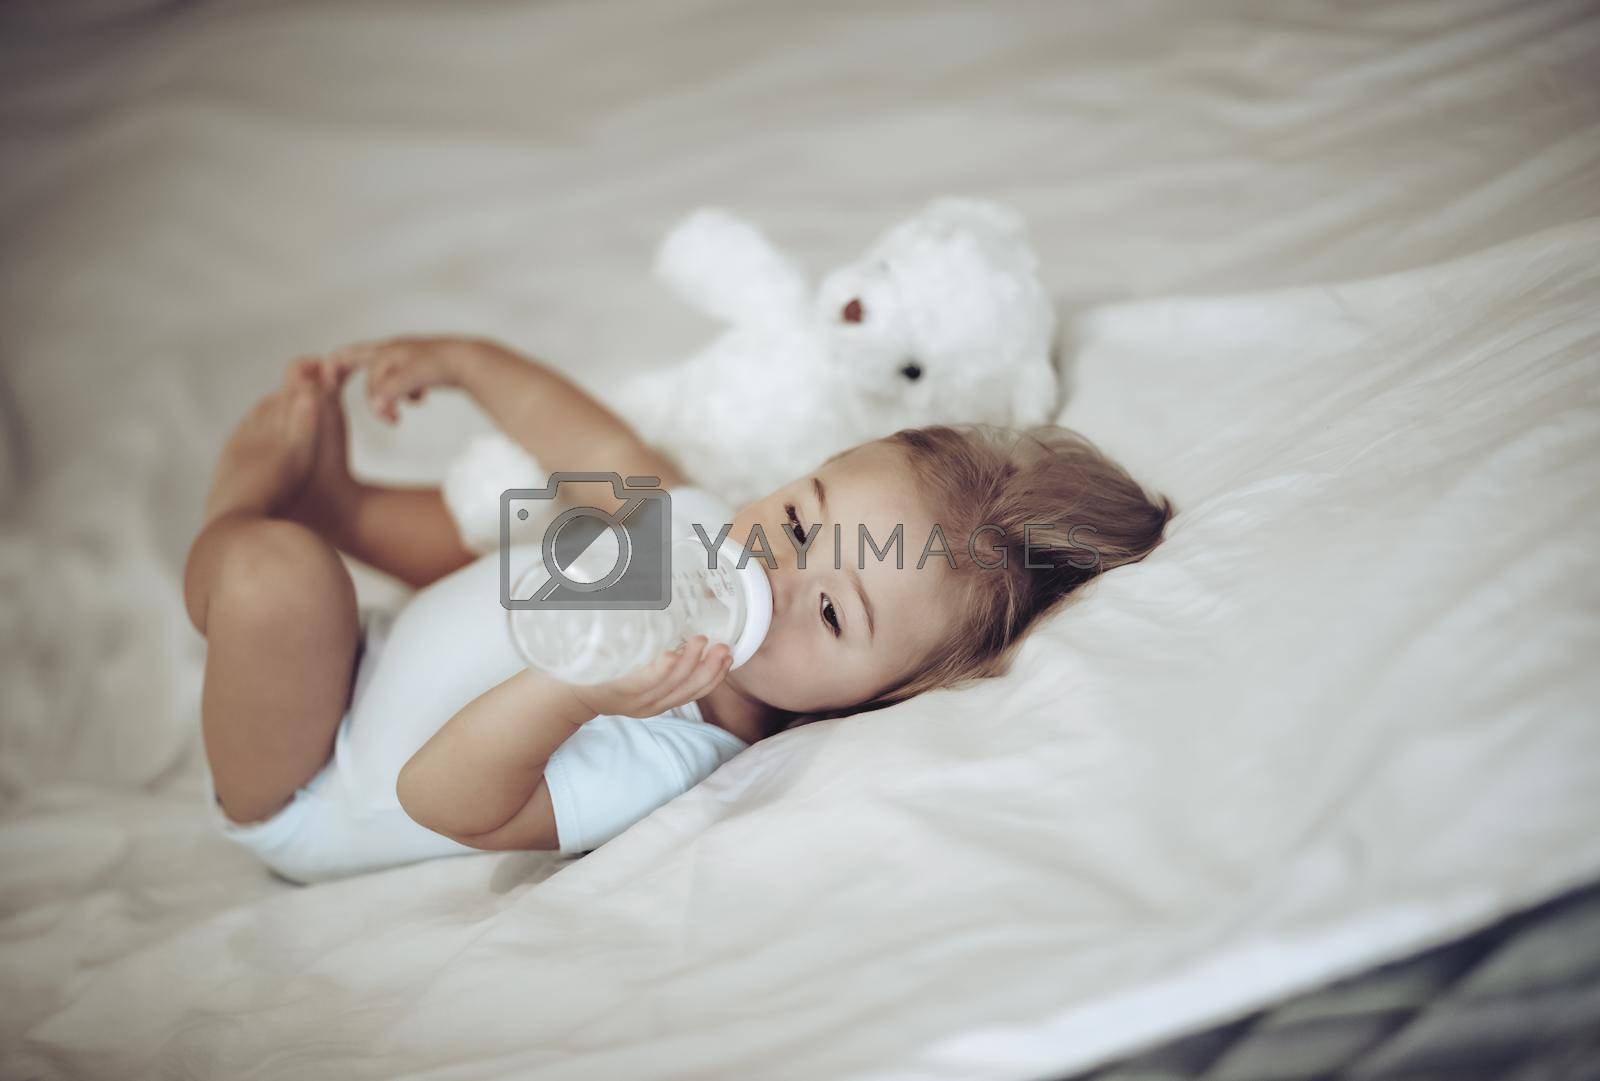 Royalty free image of Little Child Drinking Milk by Anna_Omelchenko